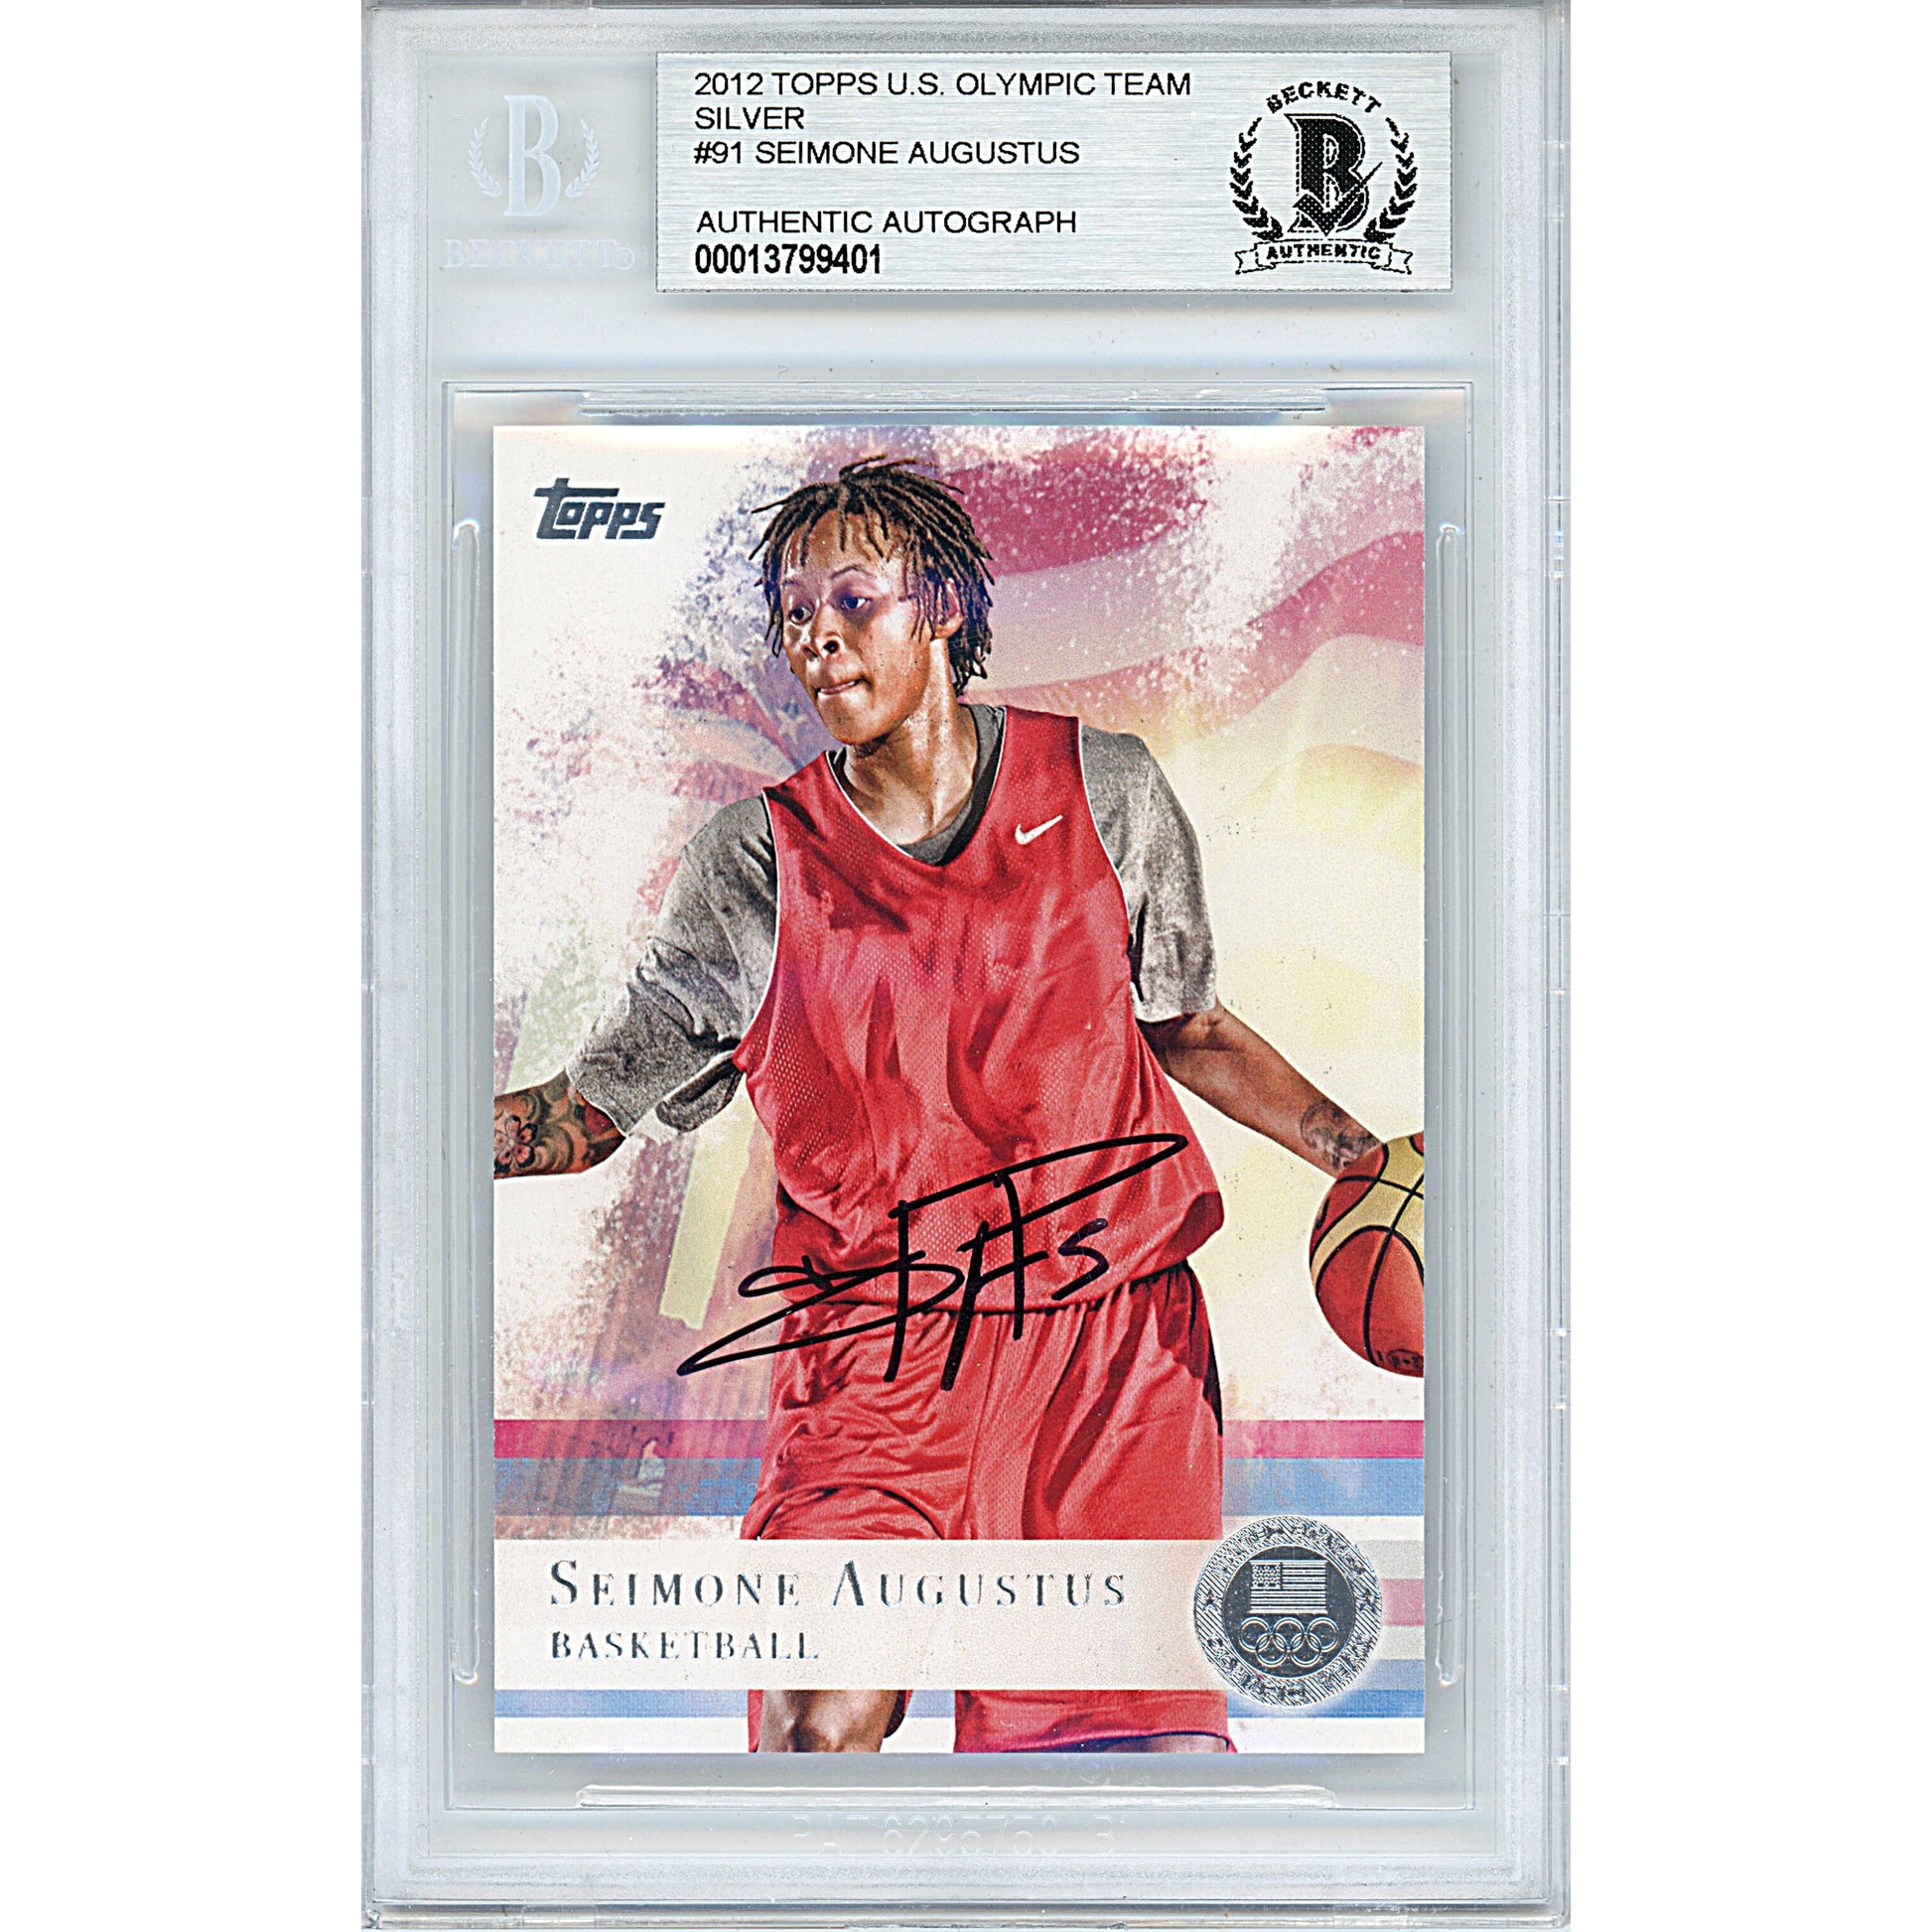 Basketballs- Autographed- Seimone Augustus Signed 2012 Topps US Olympic Team Silver Basketball Card Beckett BAS Slabbed 00013799401 - 101